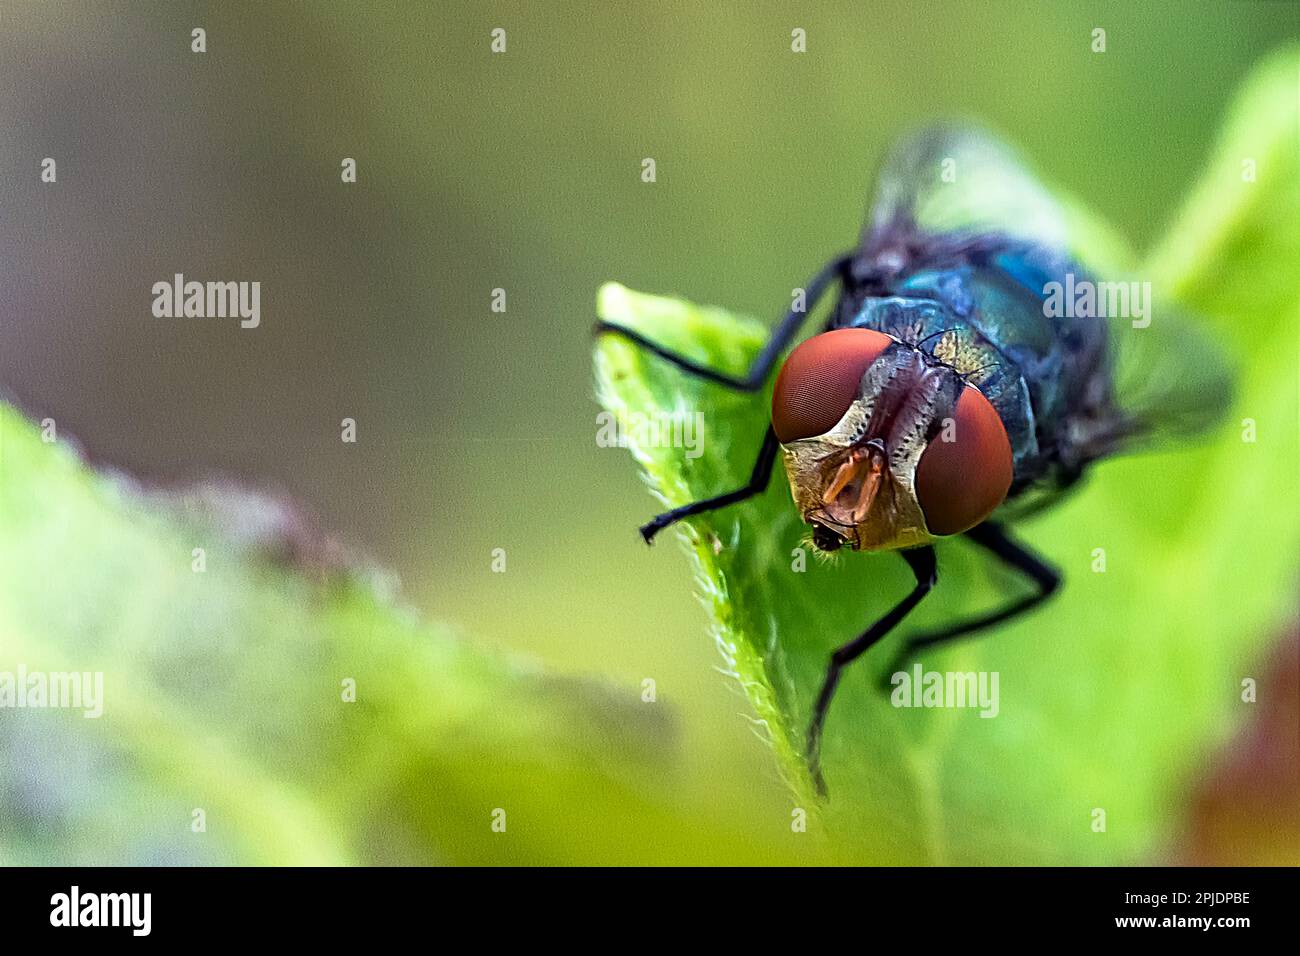 Blue fly or Calliphora vomitoria or commonly called the orange-bearded blue bottle fly. Macro photography. Copy space Stock Photo